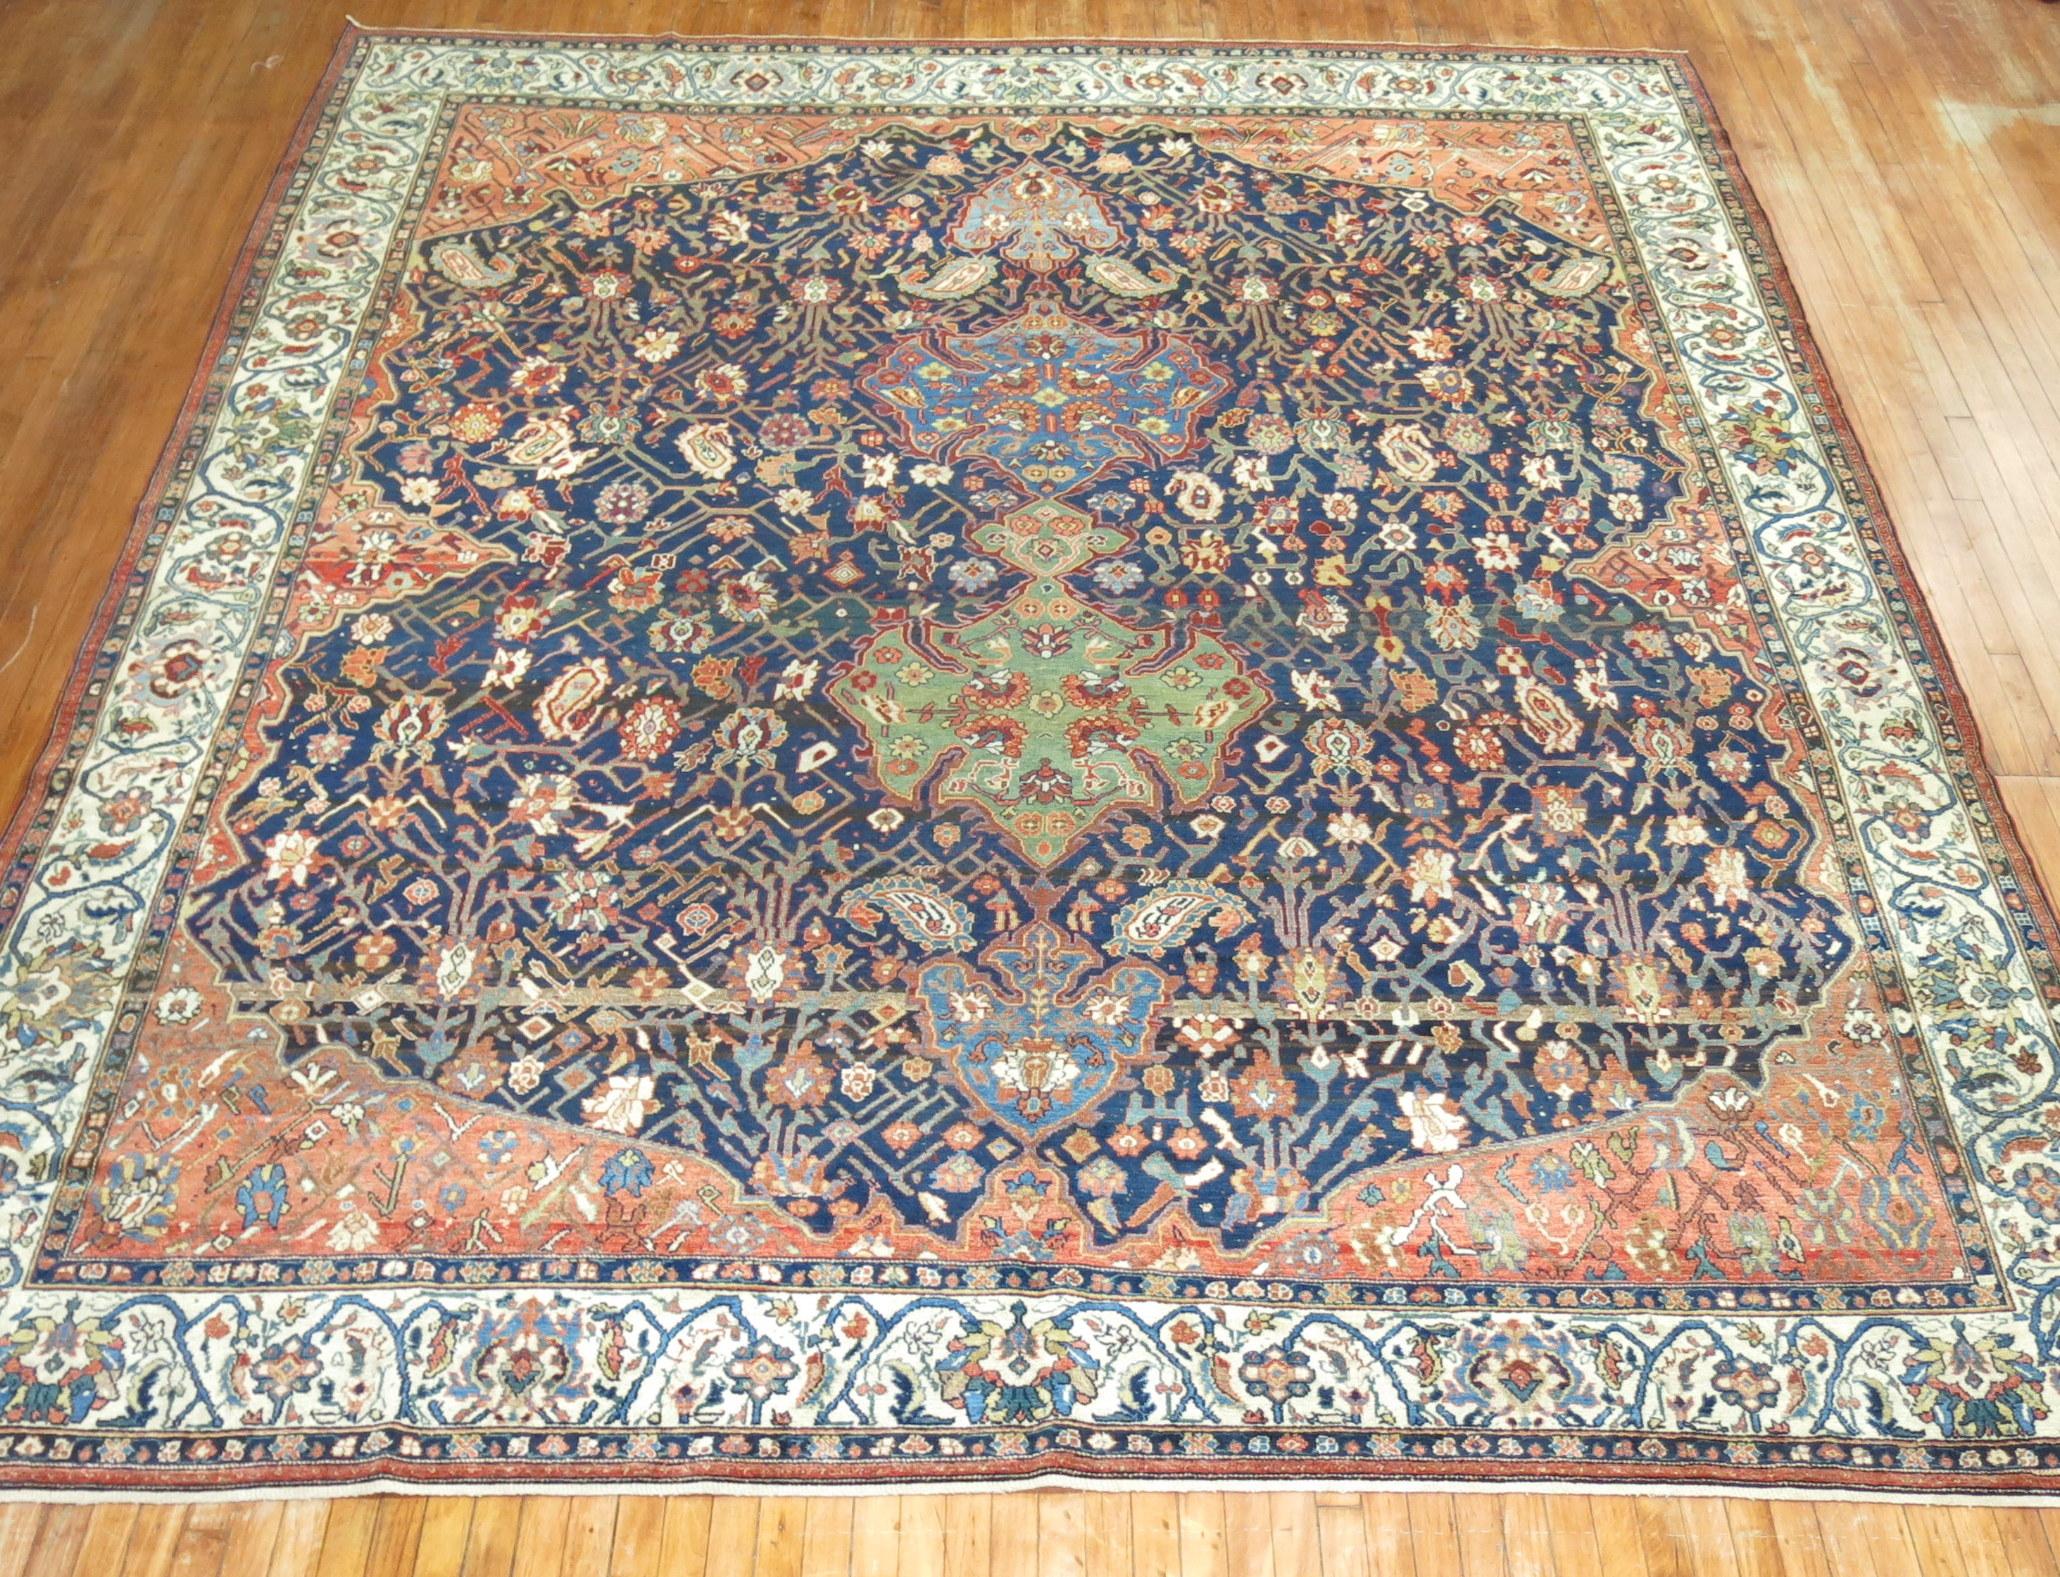 High Decorative early 20th-century Room size Persian Malayer rug with a dramatic pattern in rust, blues and green on a navy field surrounded by an ivory border

Measures: 10'8'' x 13'2''.